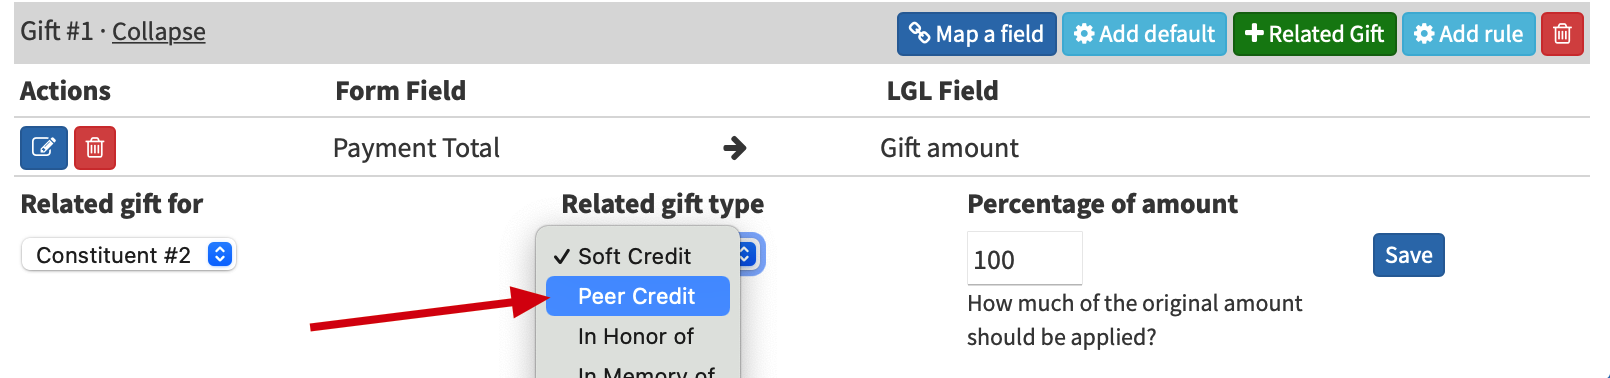 Peer Credit related gift type